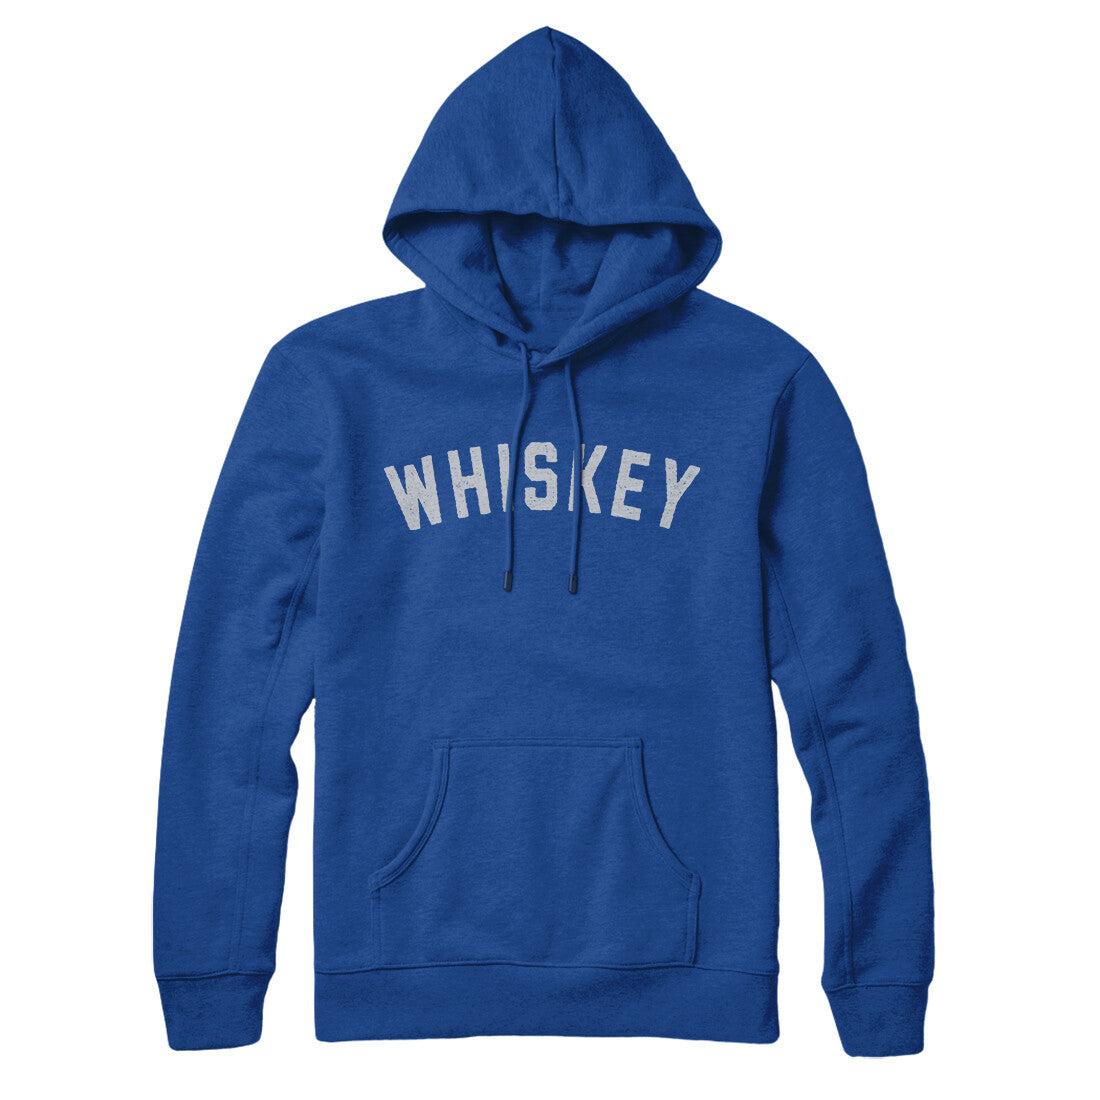 Whiskey in True Royal Color